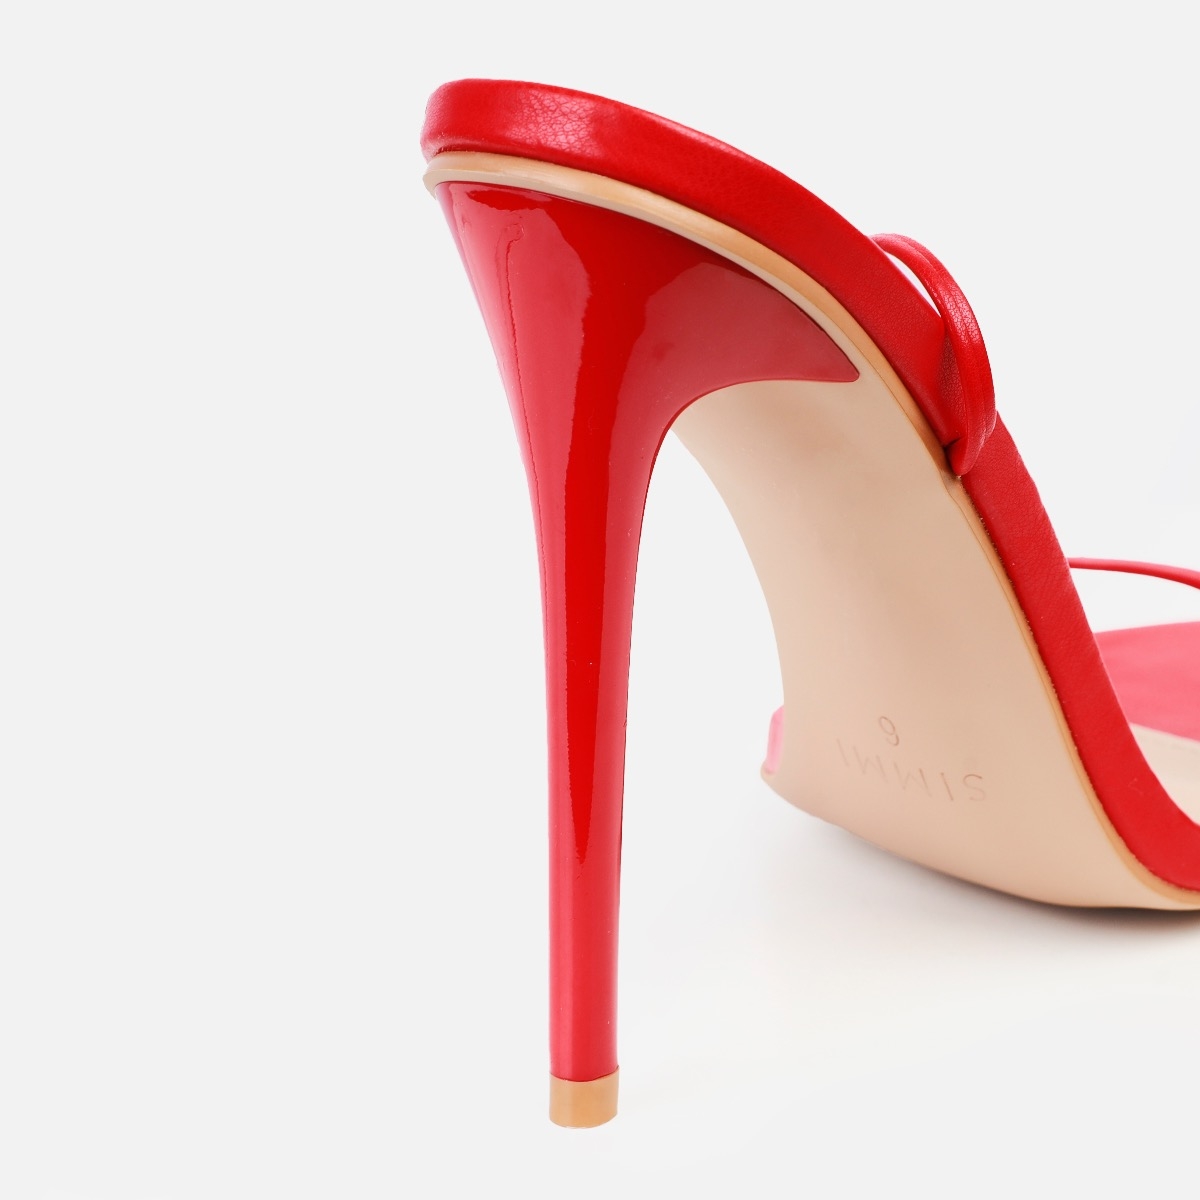 Red Heels | Buy Womens Red High Heels Online Australia - THE ICONIC